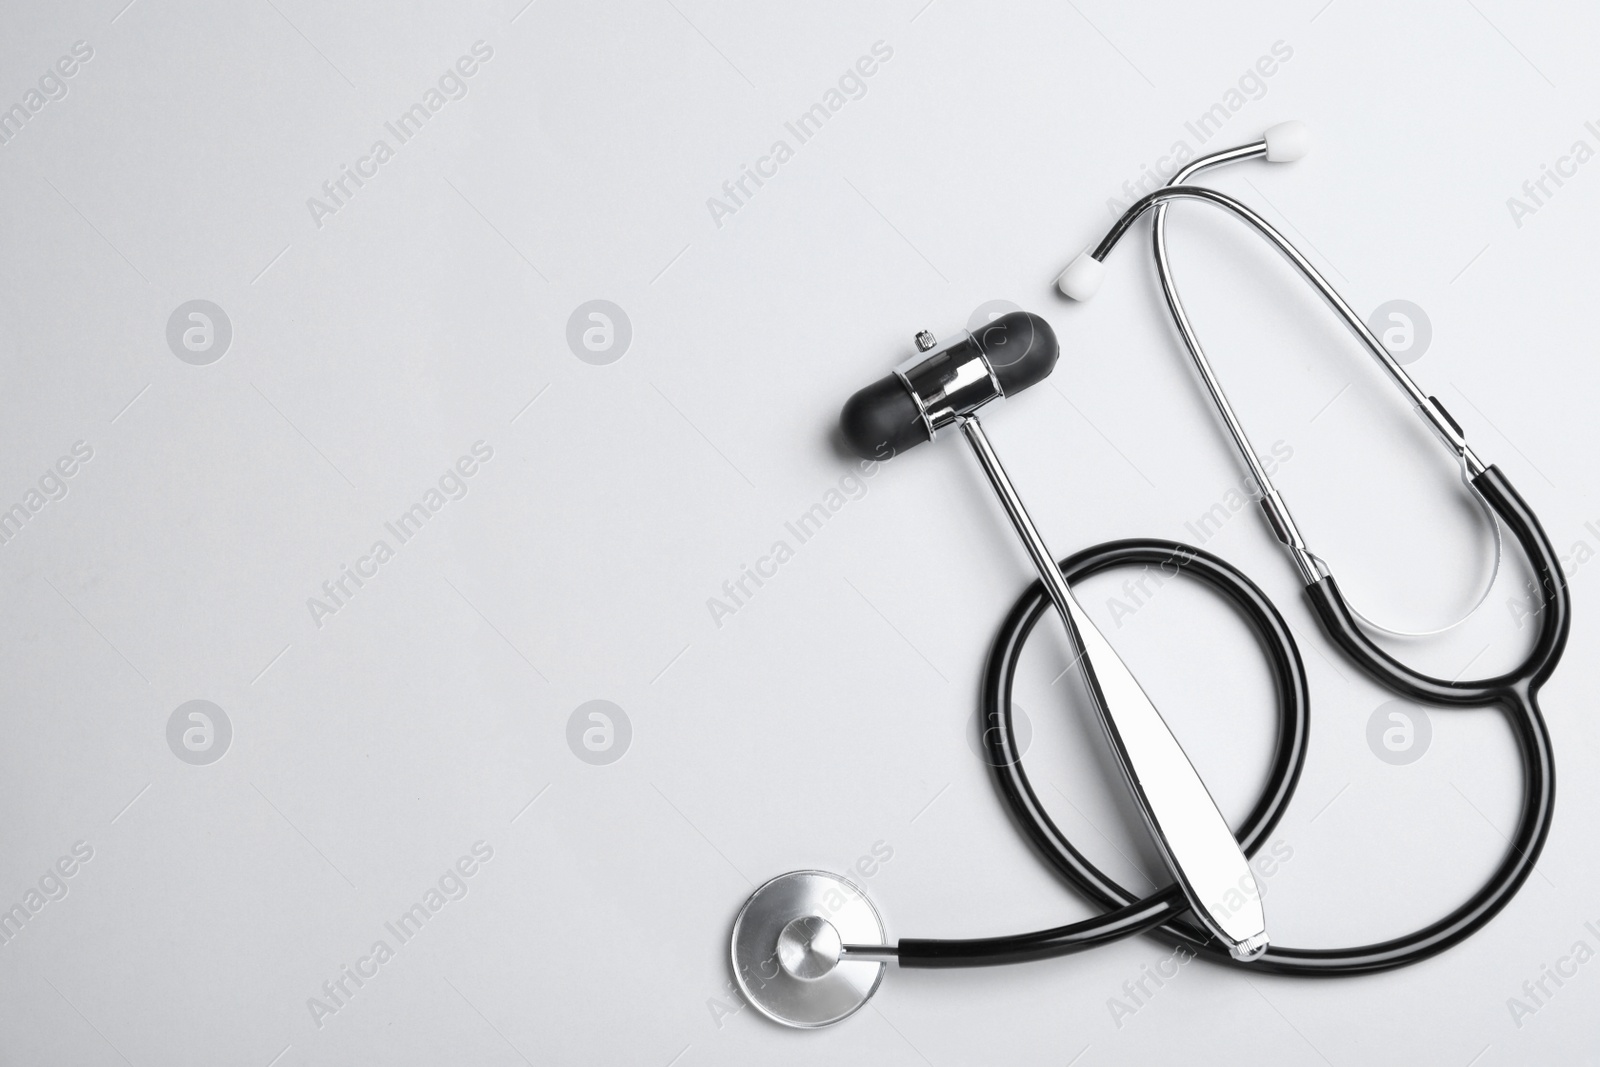 Photo of Reflex hammer with stethoscope on white background, flat lay and space for text. Nervous system diagnostic